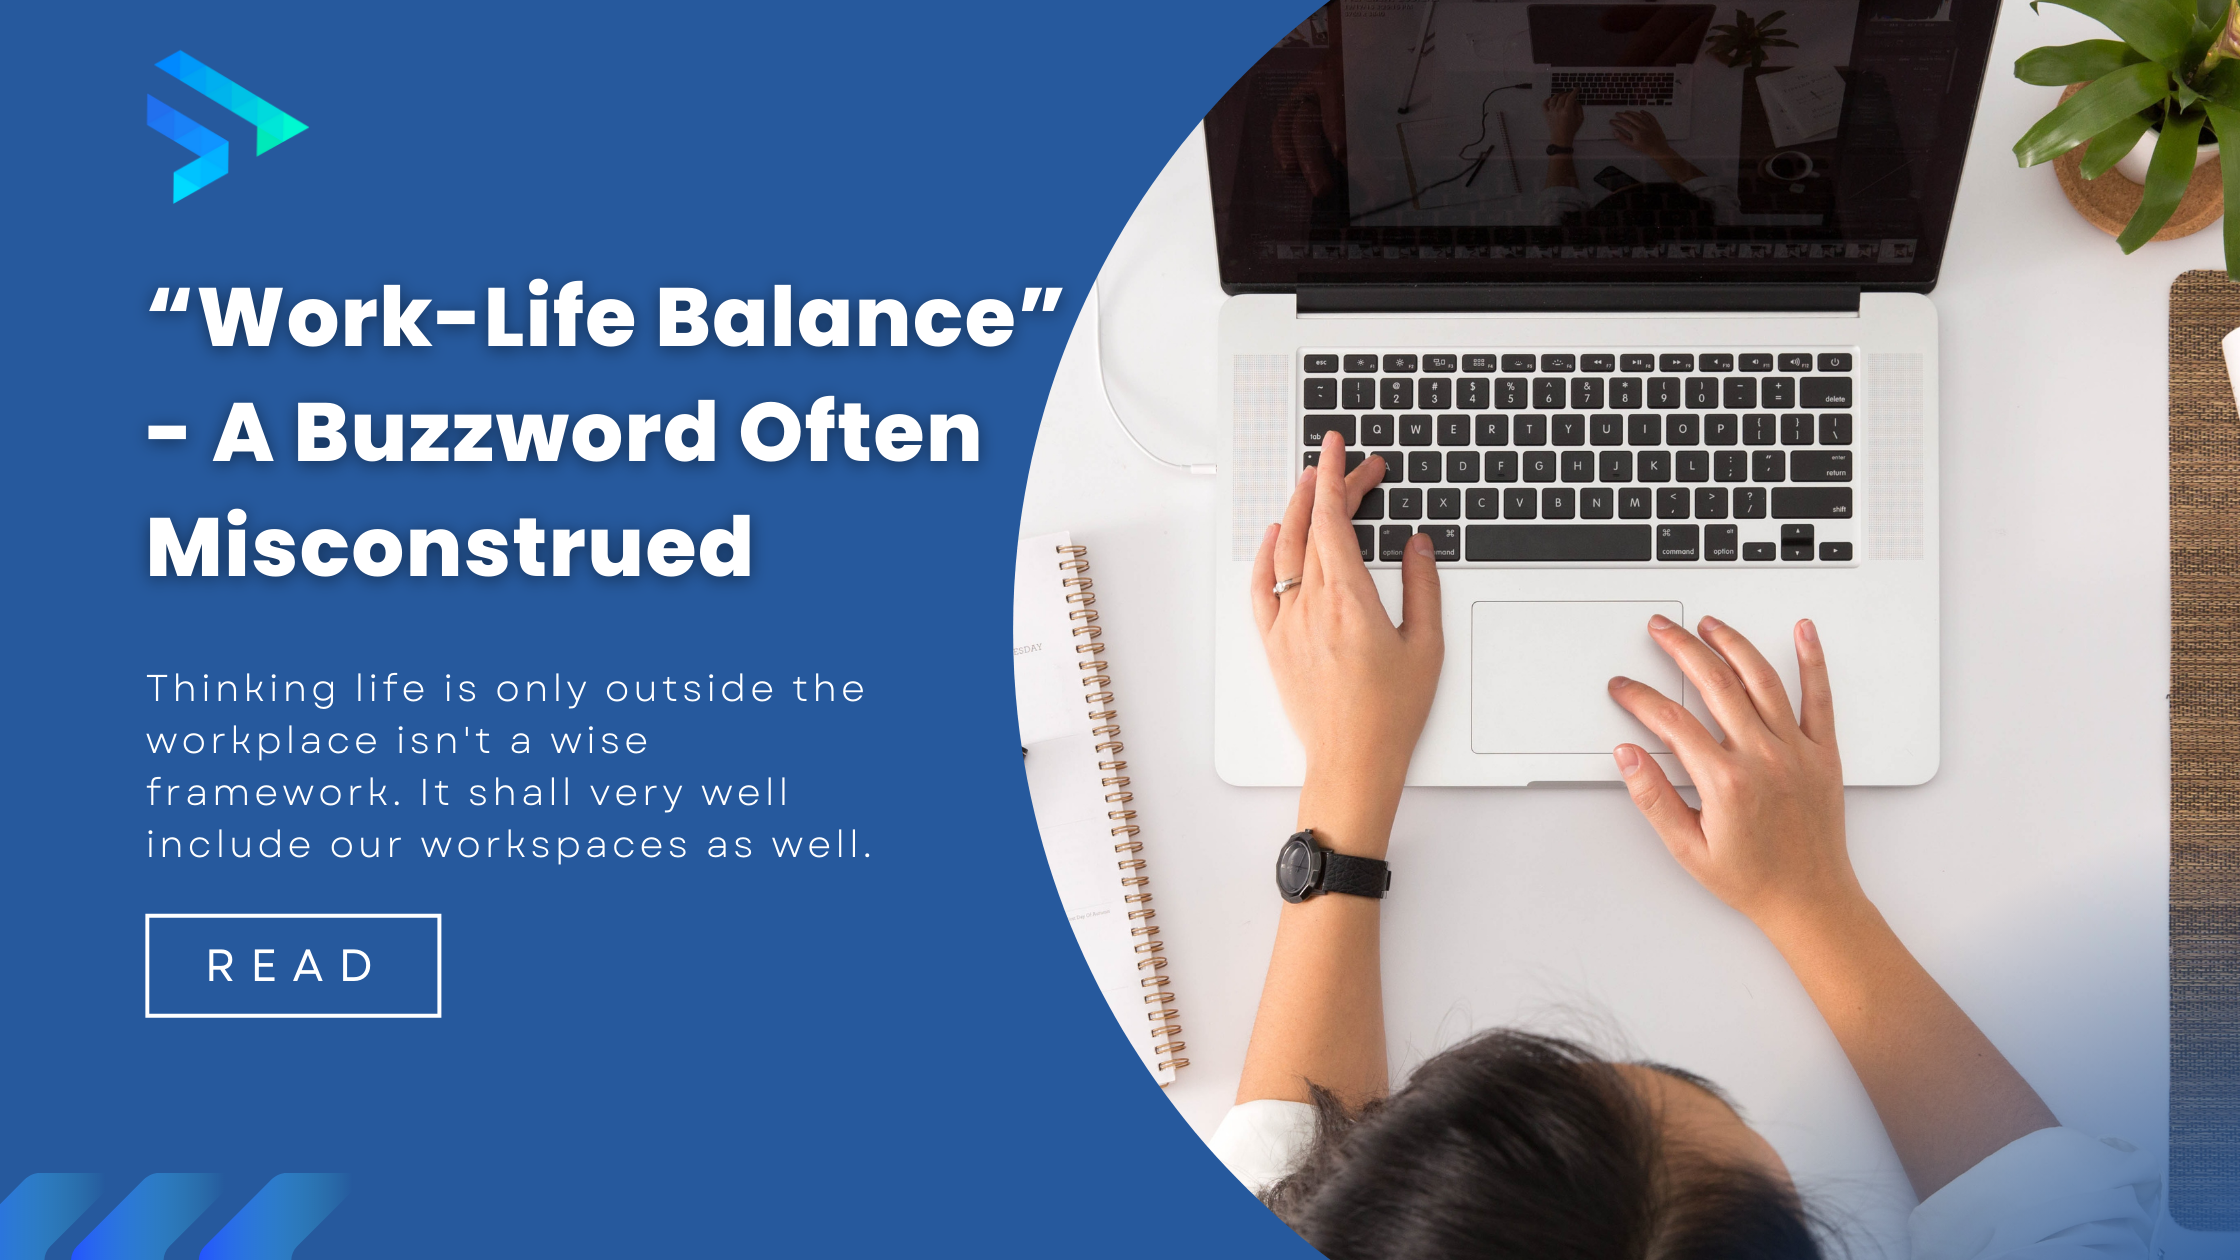 Work-life Balance” - The Ultimate Guide